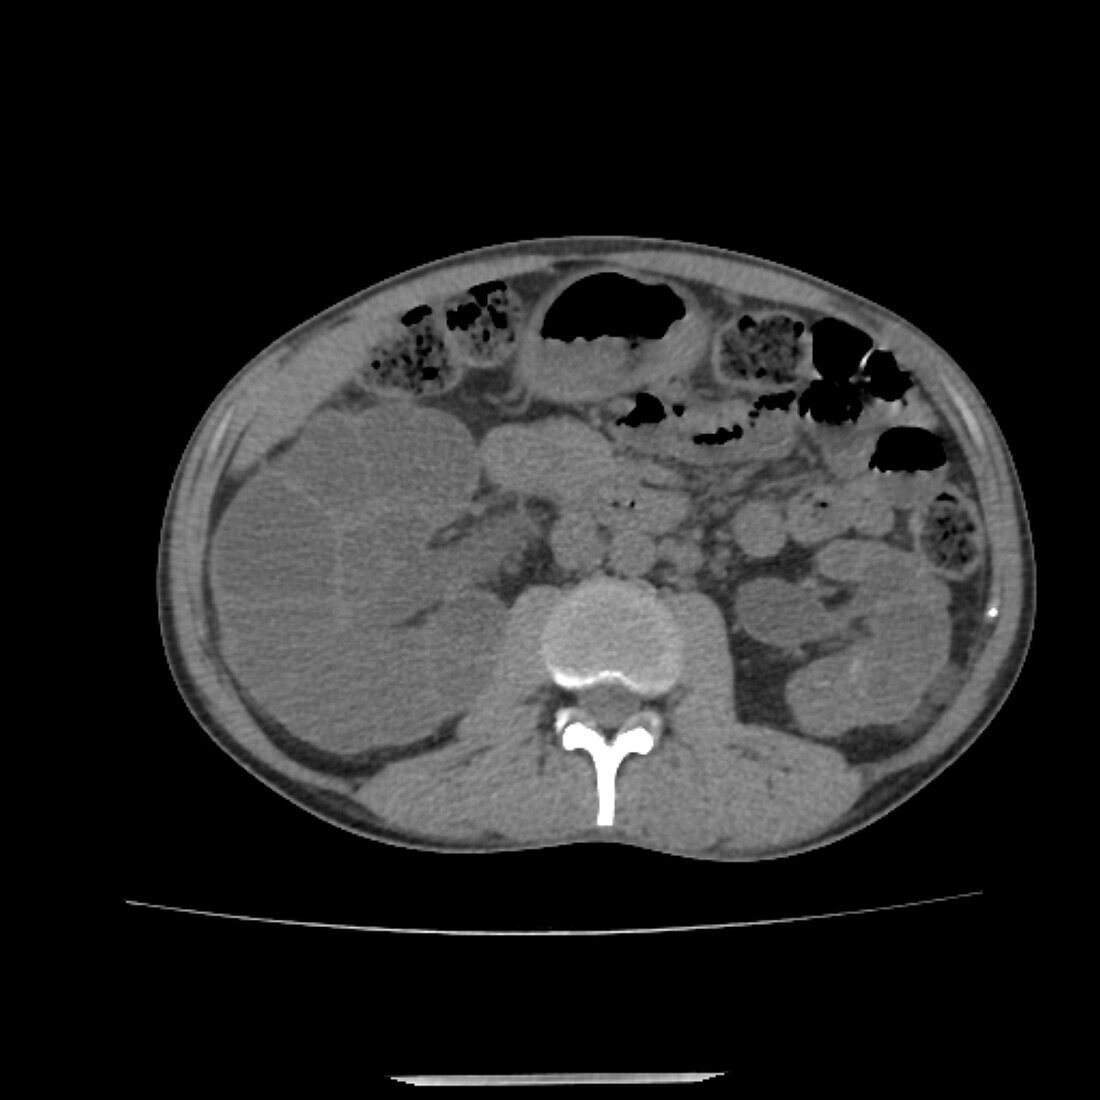 Polycystic kidney disease, CT scan